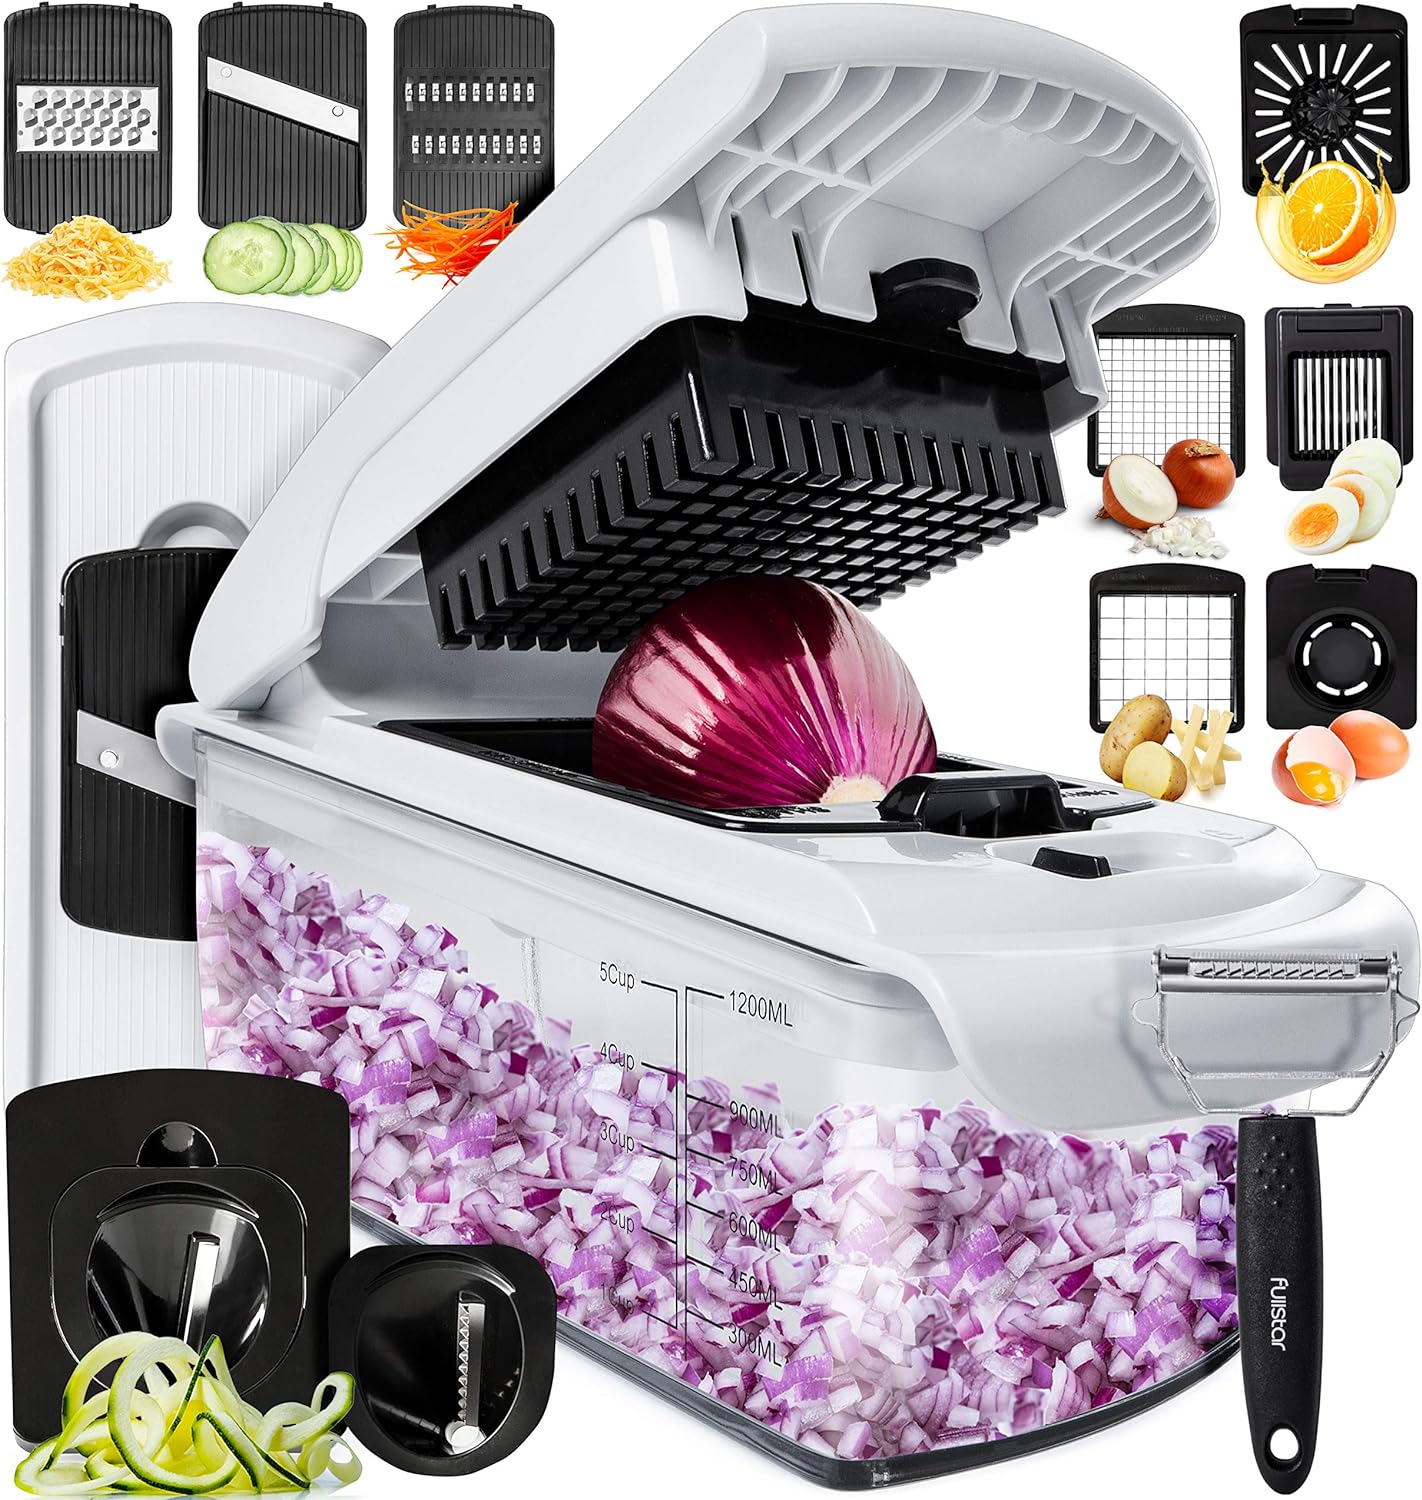 All in one vegetable chopper